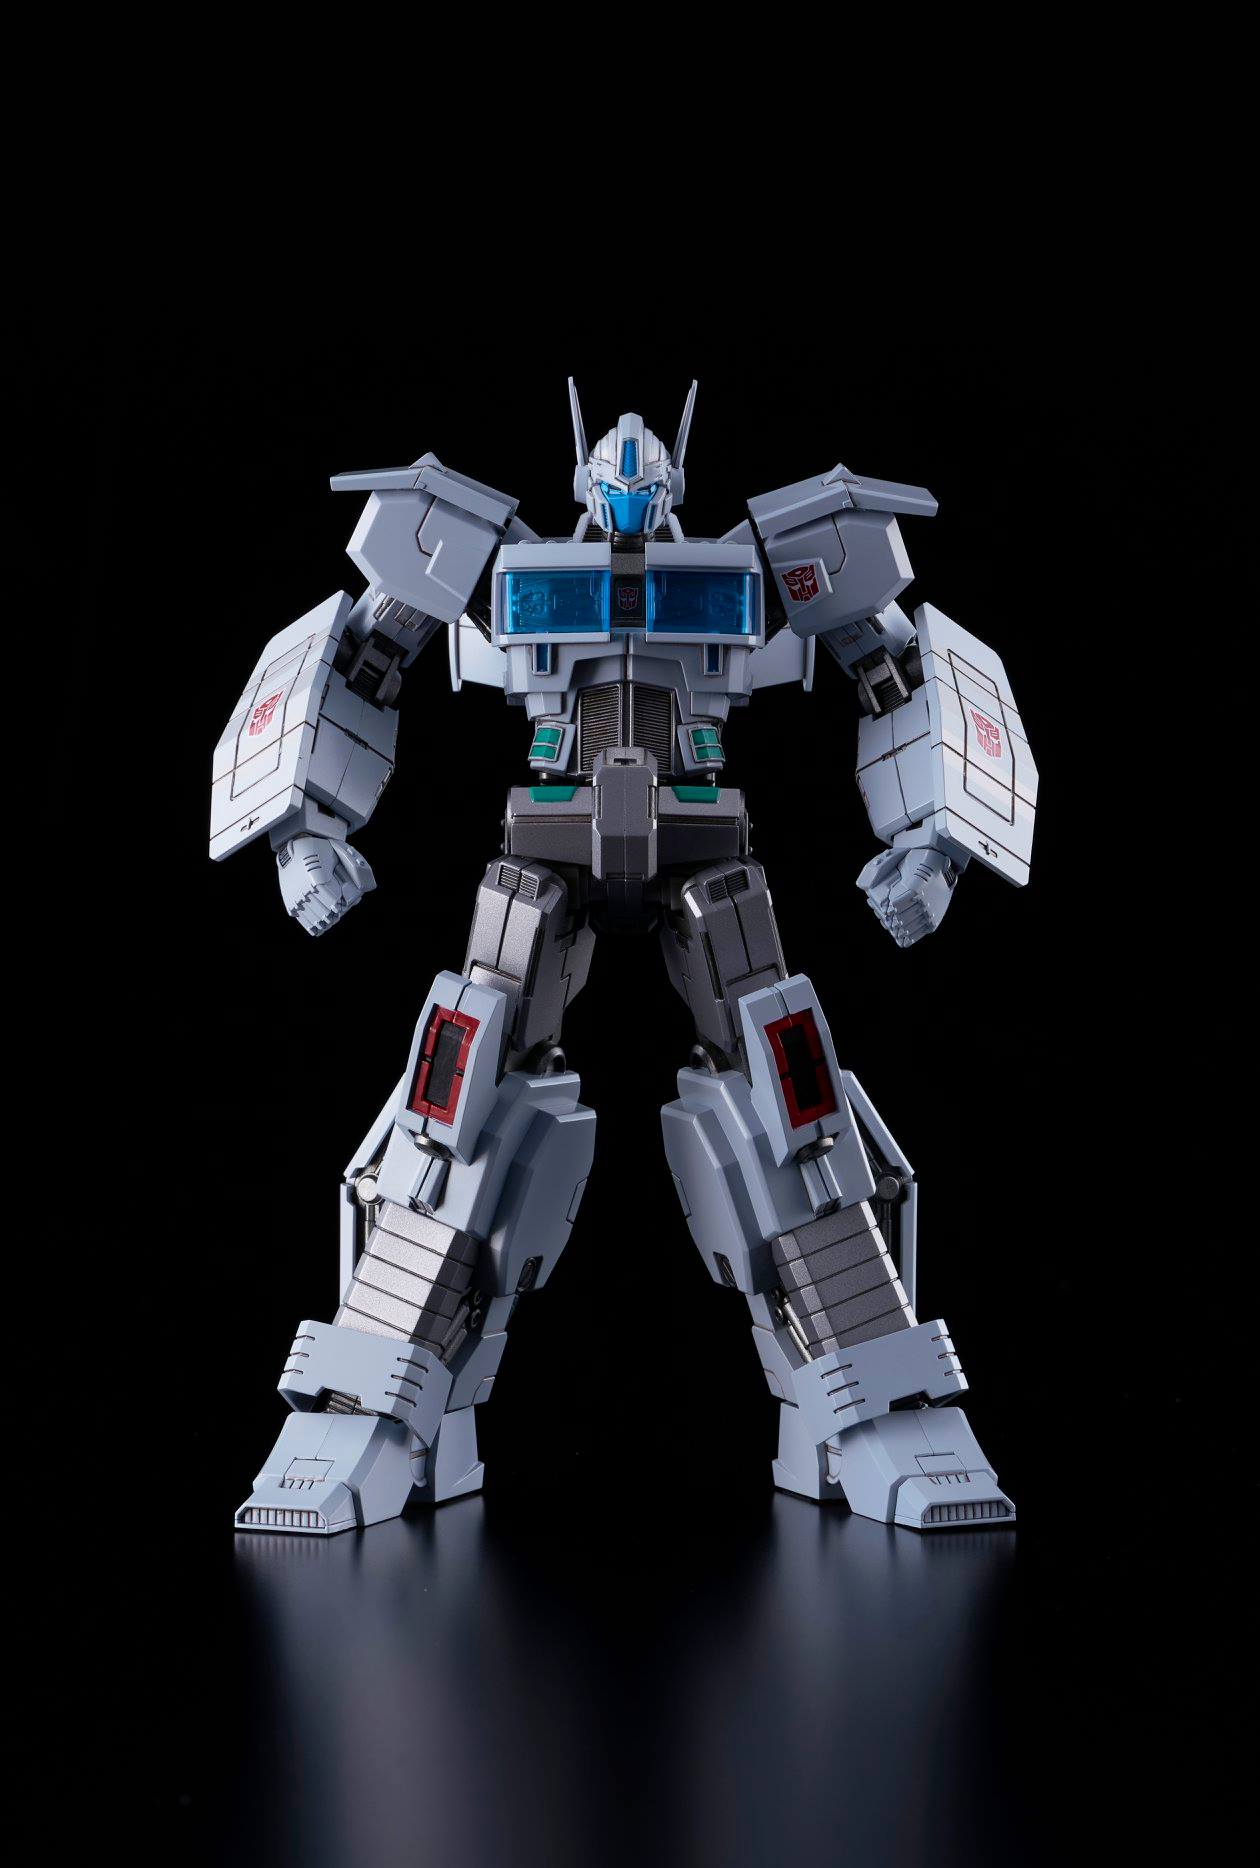 flame_toys-ultra_magnus_idw-3